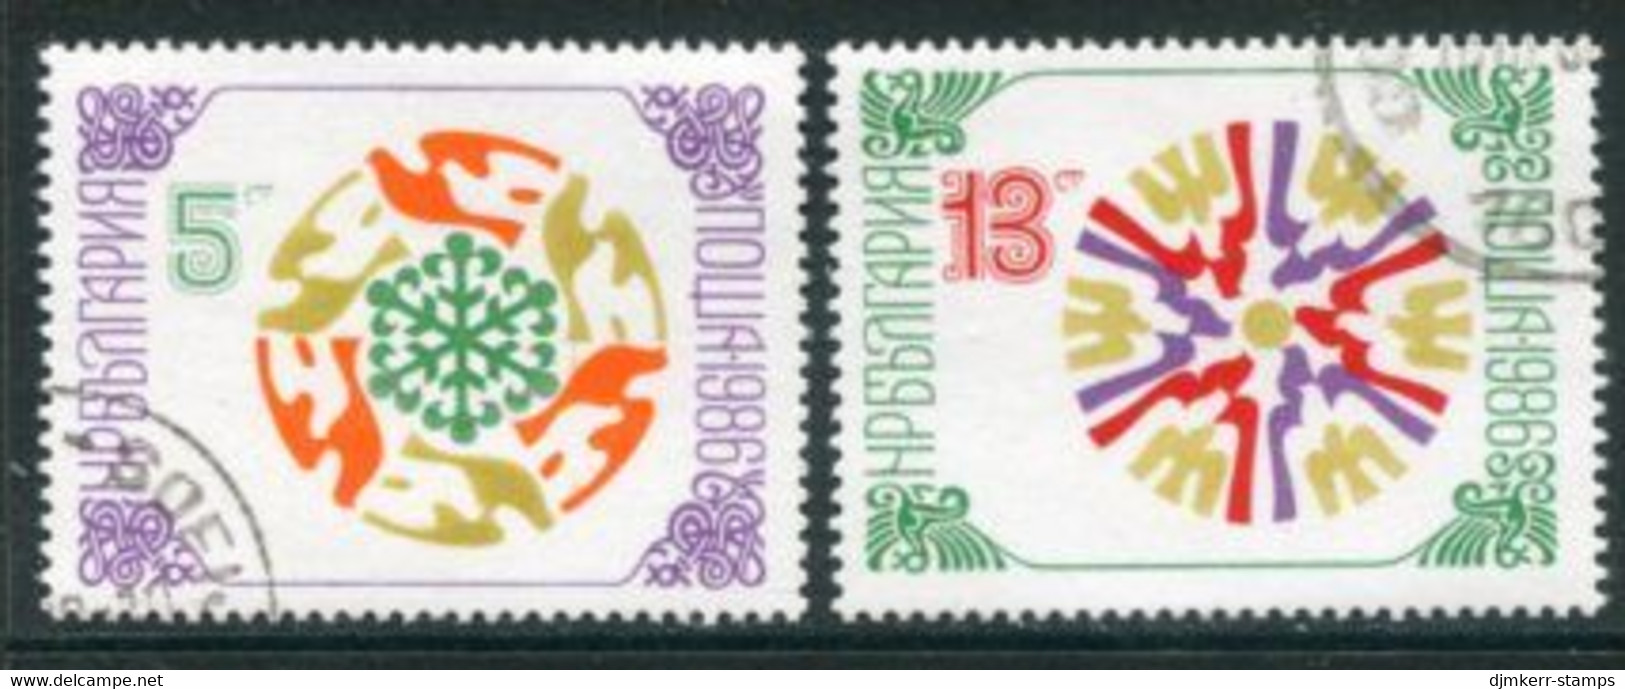 BULGARIA 1985 New Year Used.  Michel 3427-28 - Used Stamps